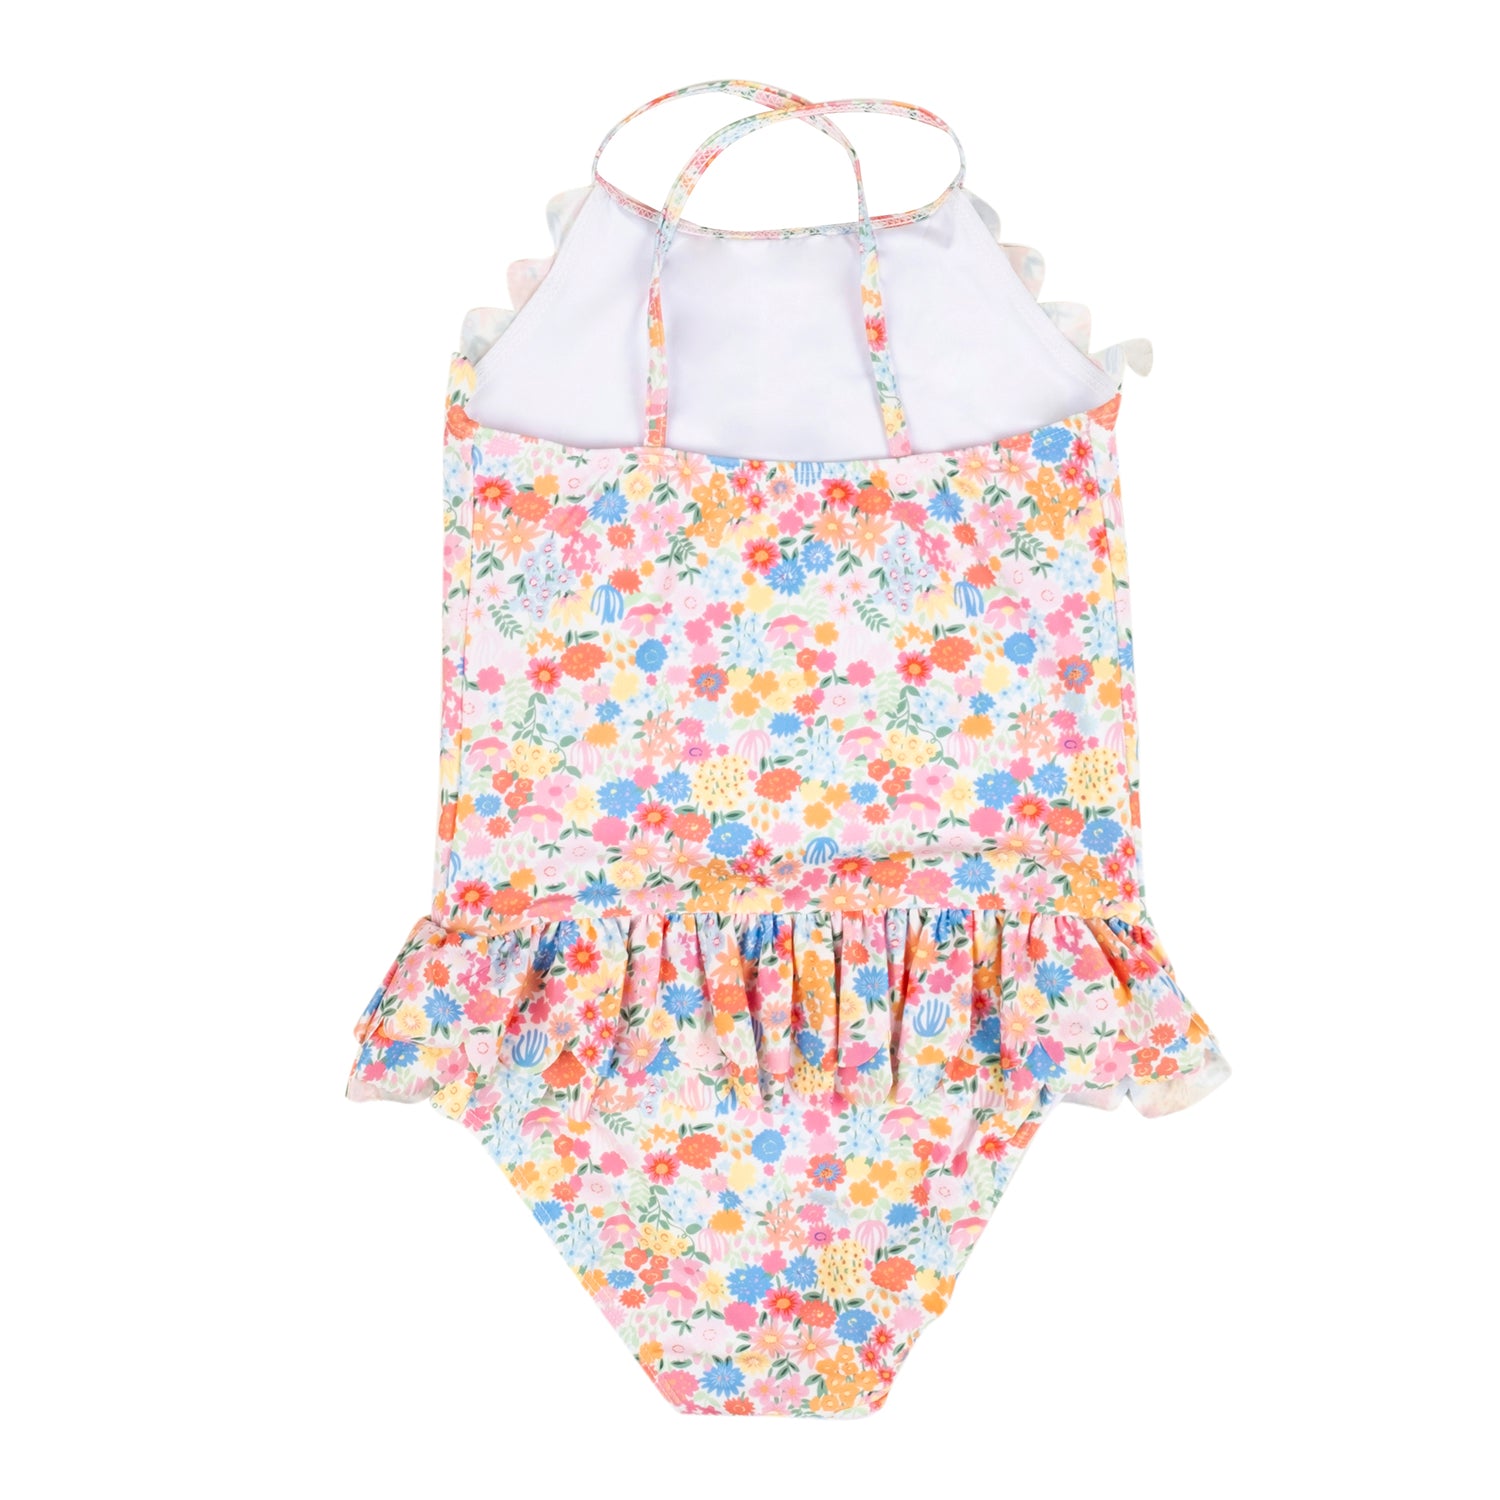 Baby Moo Floral Print Beach One-Piece Swimsuit Pool Swimming Costume - Pink